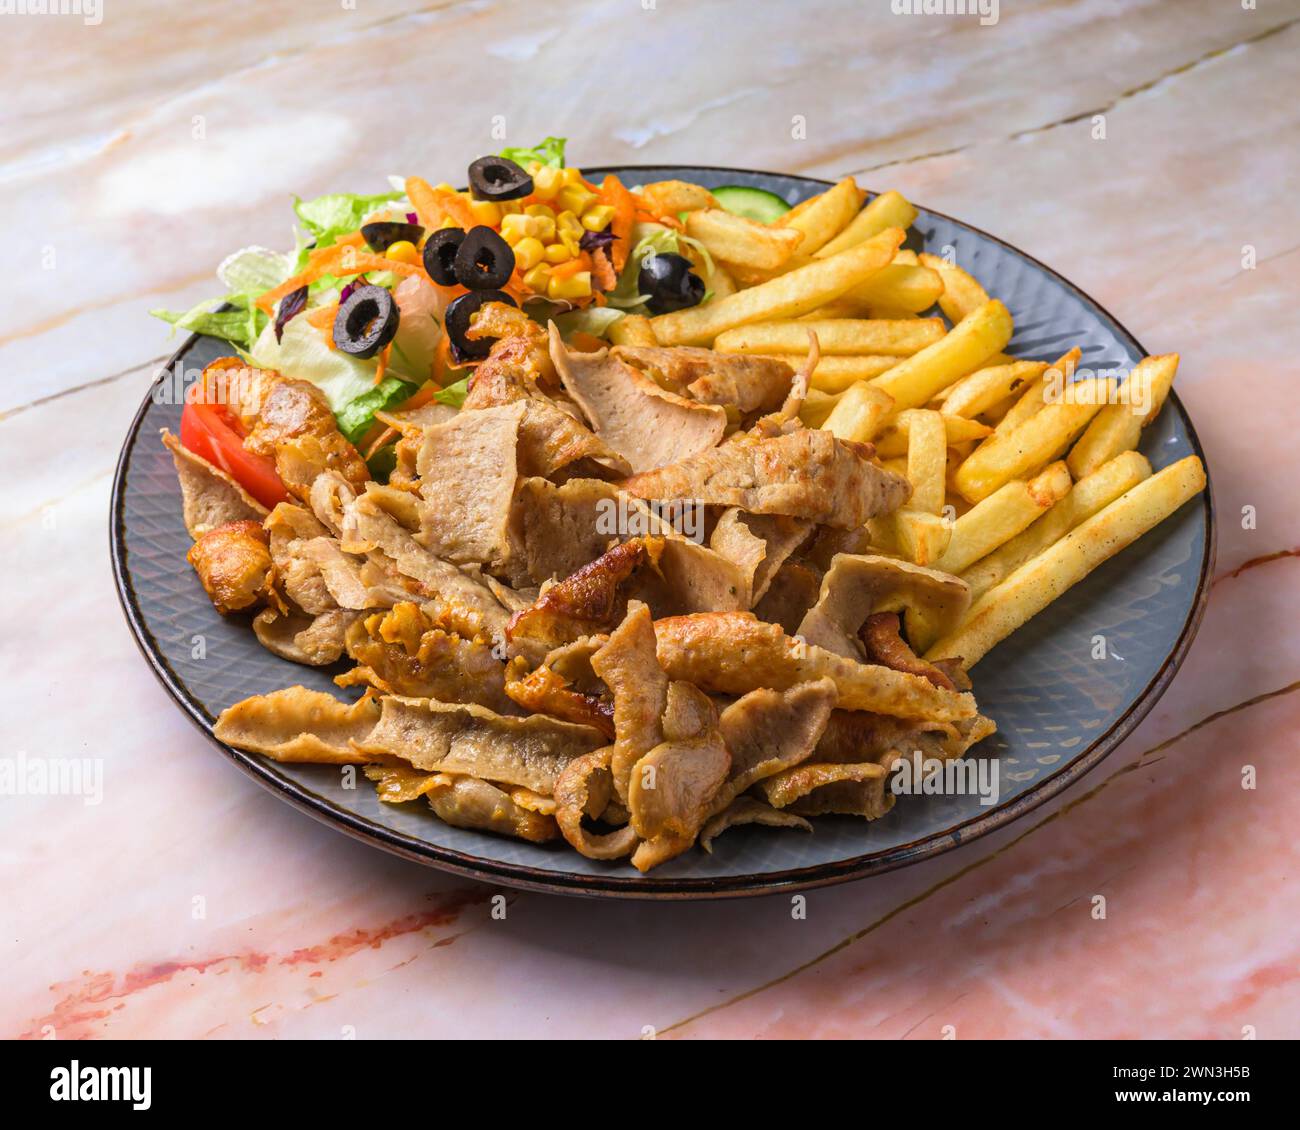 Chicken Shawarma plate with salad, fries served in a dish isolated on grey background side view of arabian fastfood, mallorca, balearic islands, spain Stock Photo